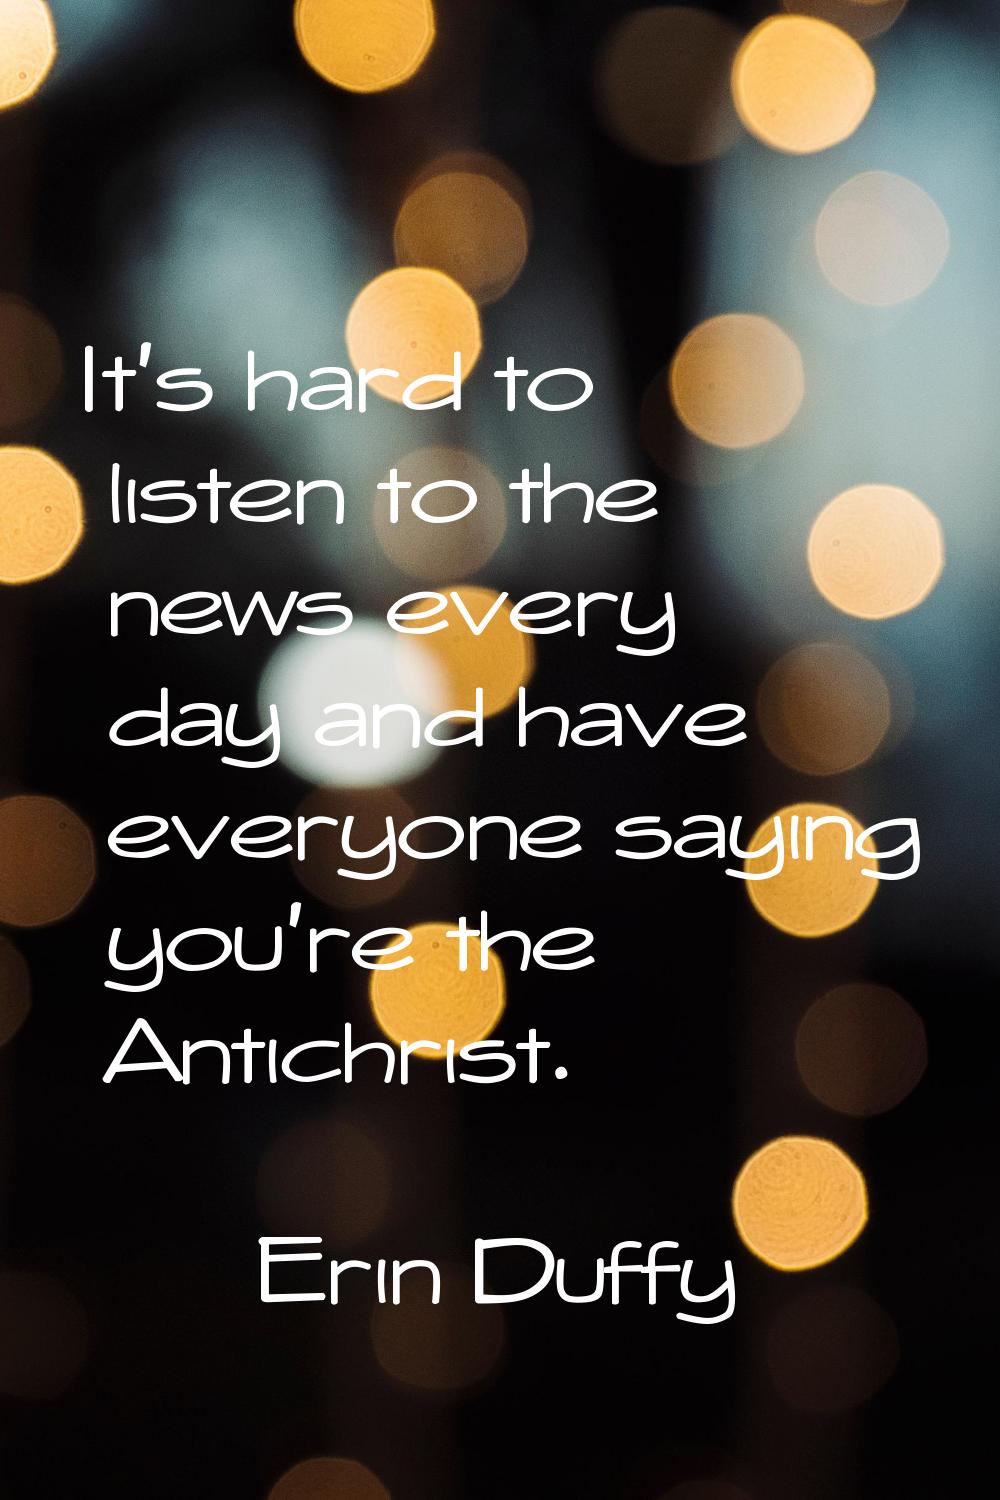 It's hard to listen to the news every day and have everyone saying you're the Antichrist.